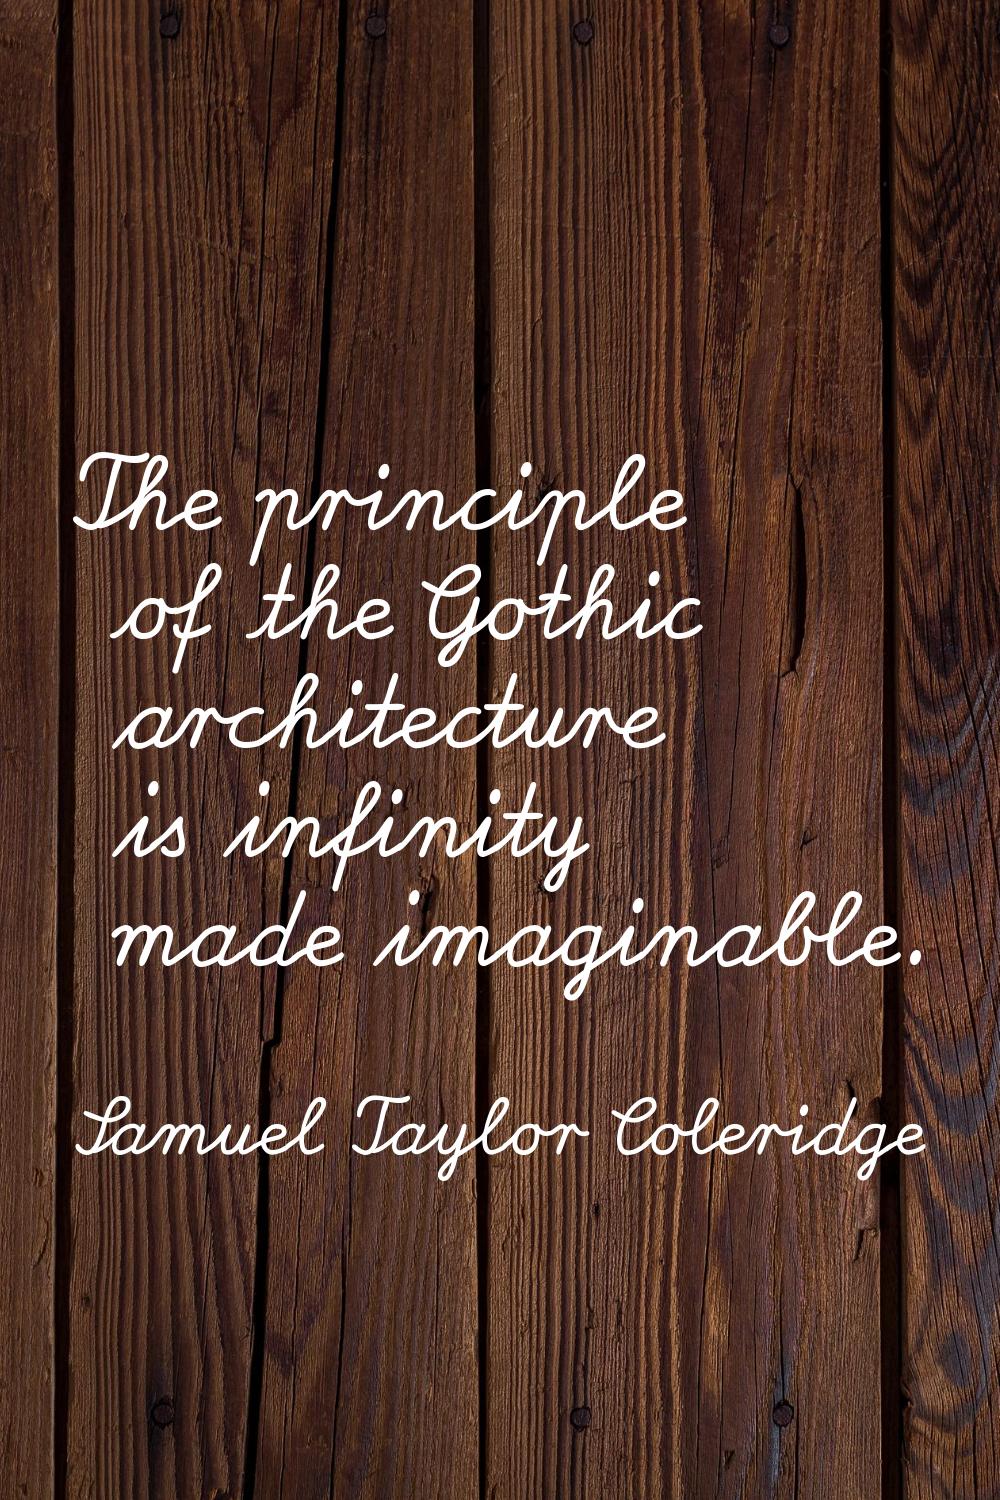 The principle of the Gothic architecture is infinity made imaginable.